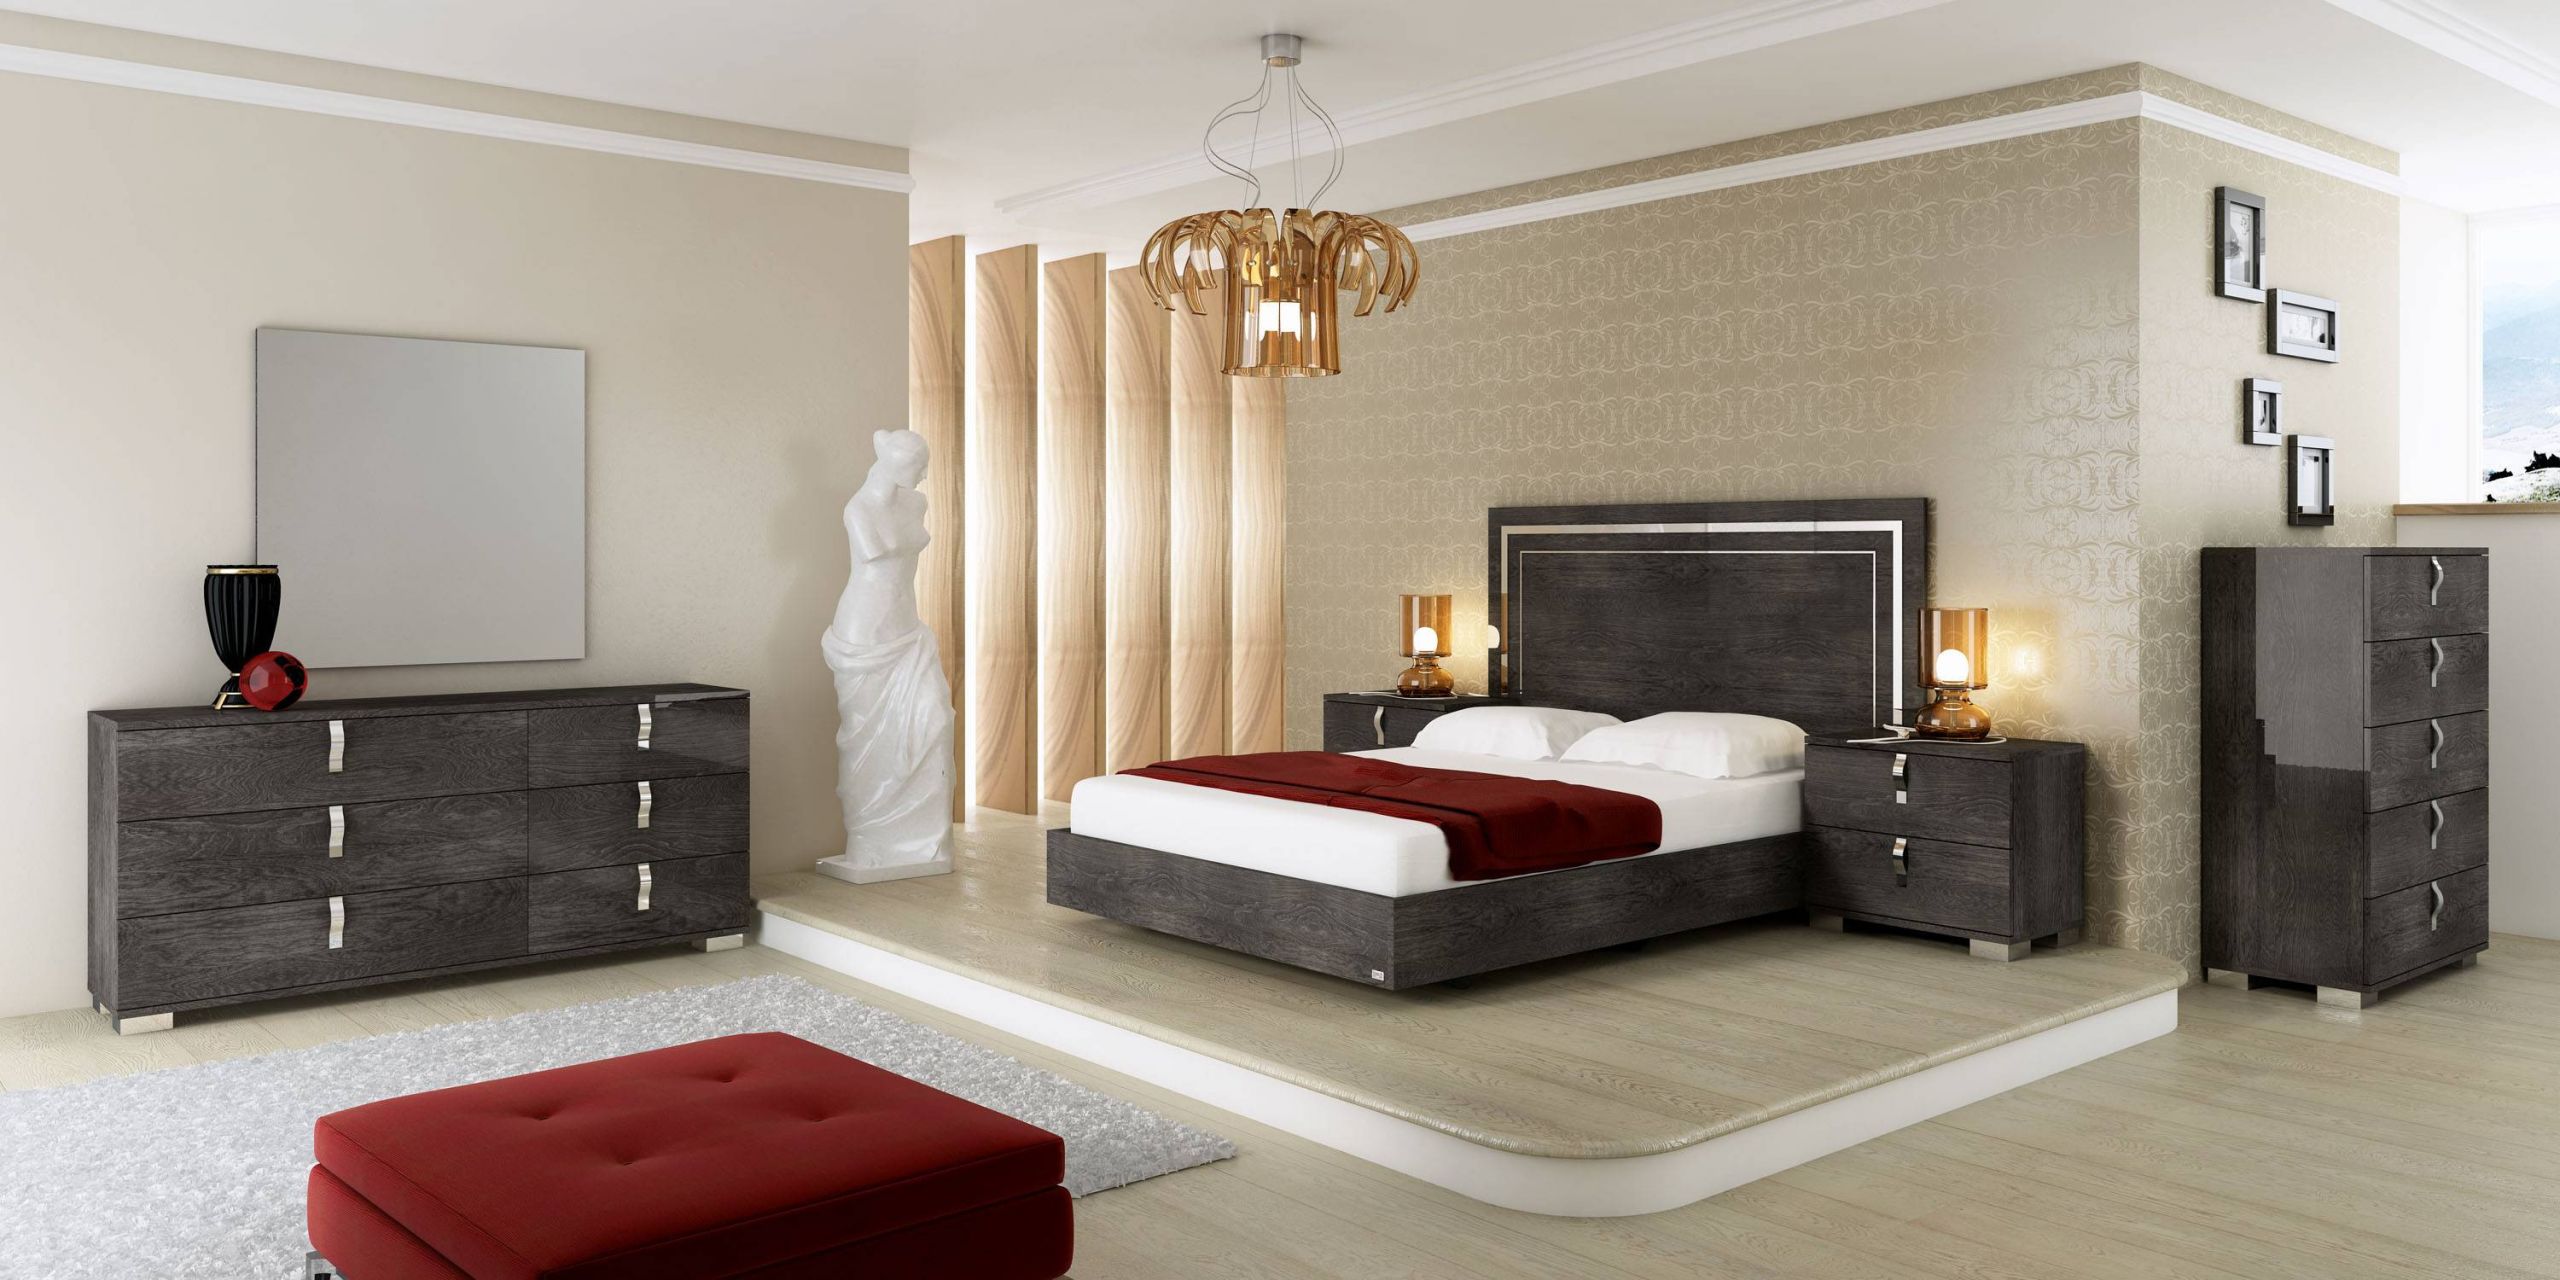 Luxury Master Bedroom Furniture
 Made in Italy Wood Luxury Elite Bedroom Furniture with